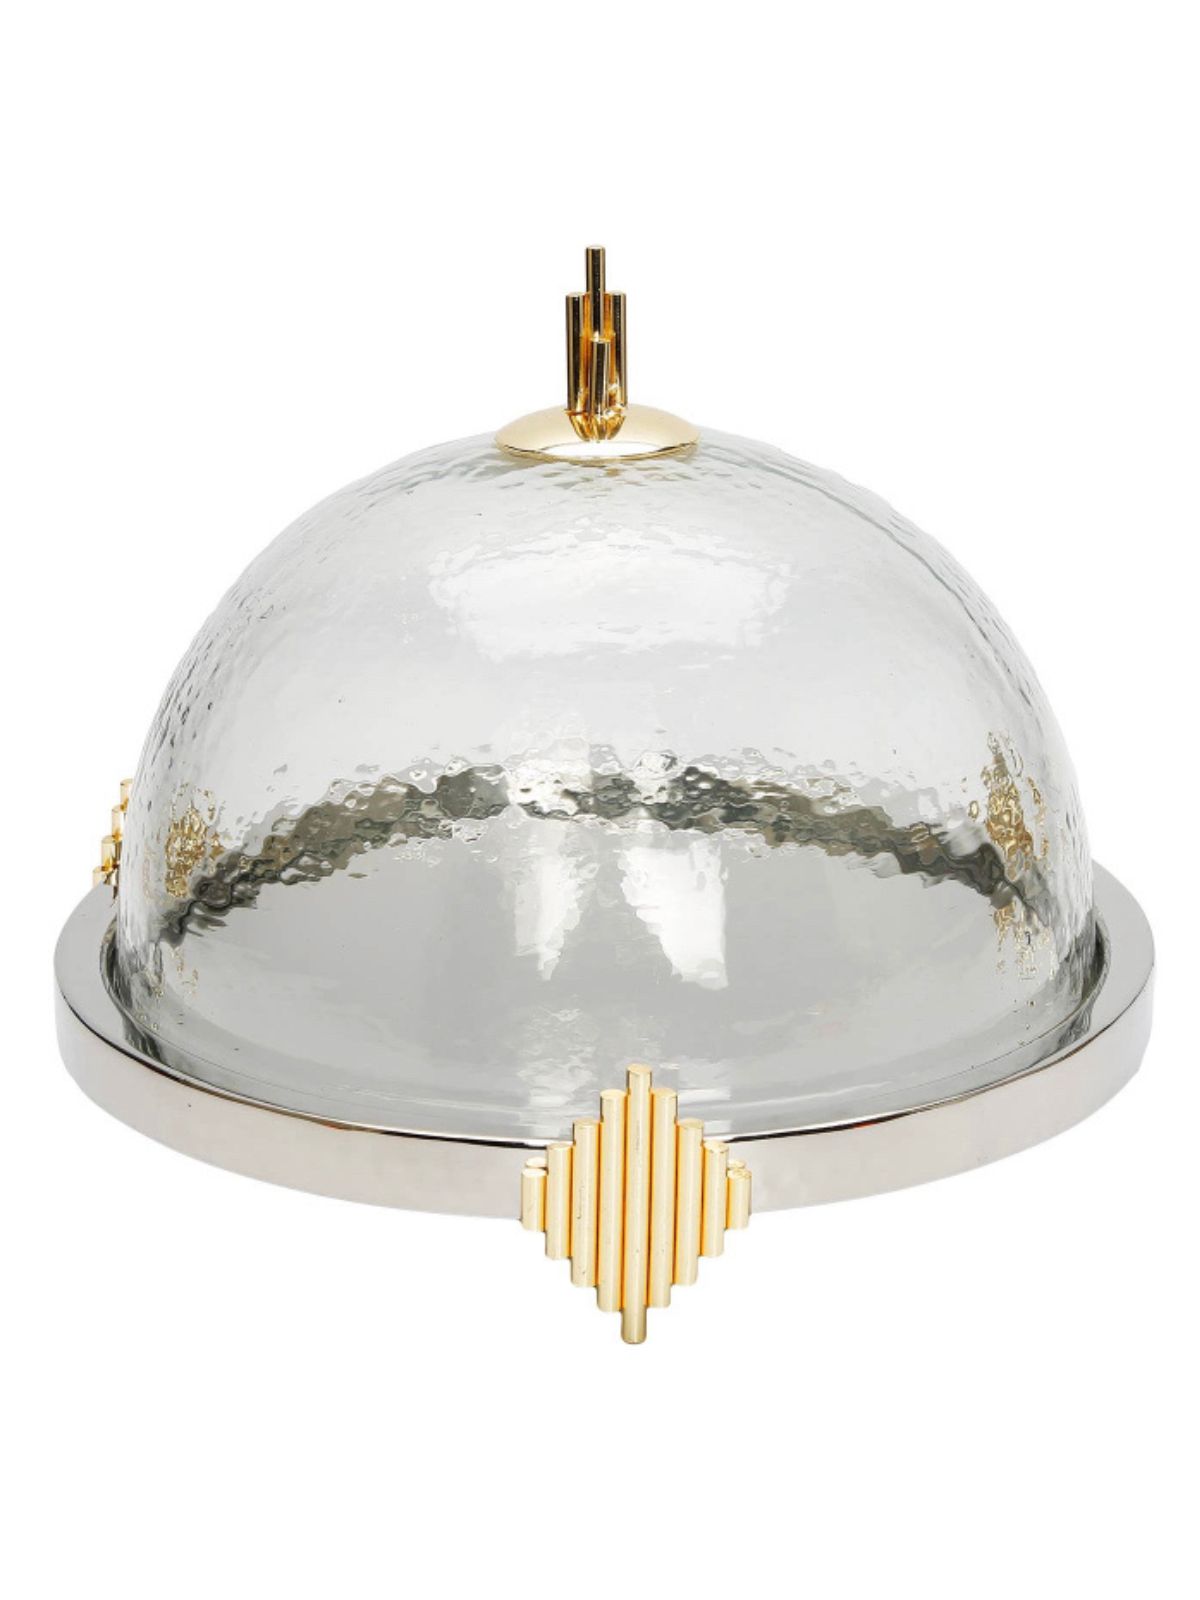 11.25D Glass Cake Dome with Stainless Steel Plate and Gold Diamond Design - KYA Home Decor.